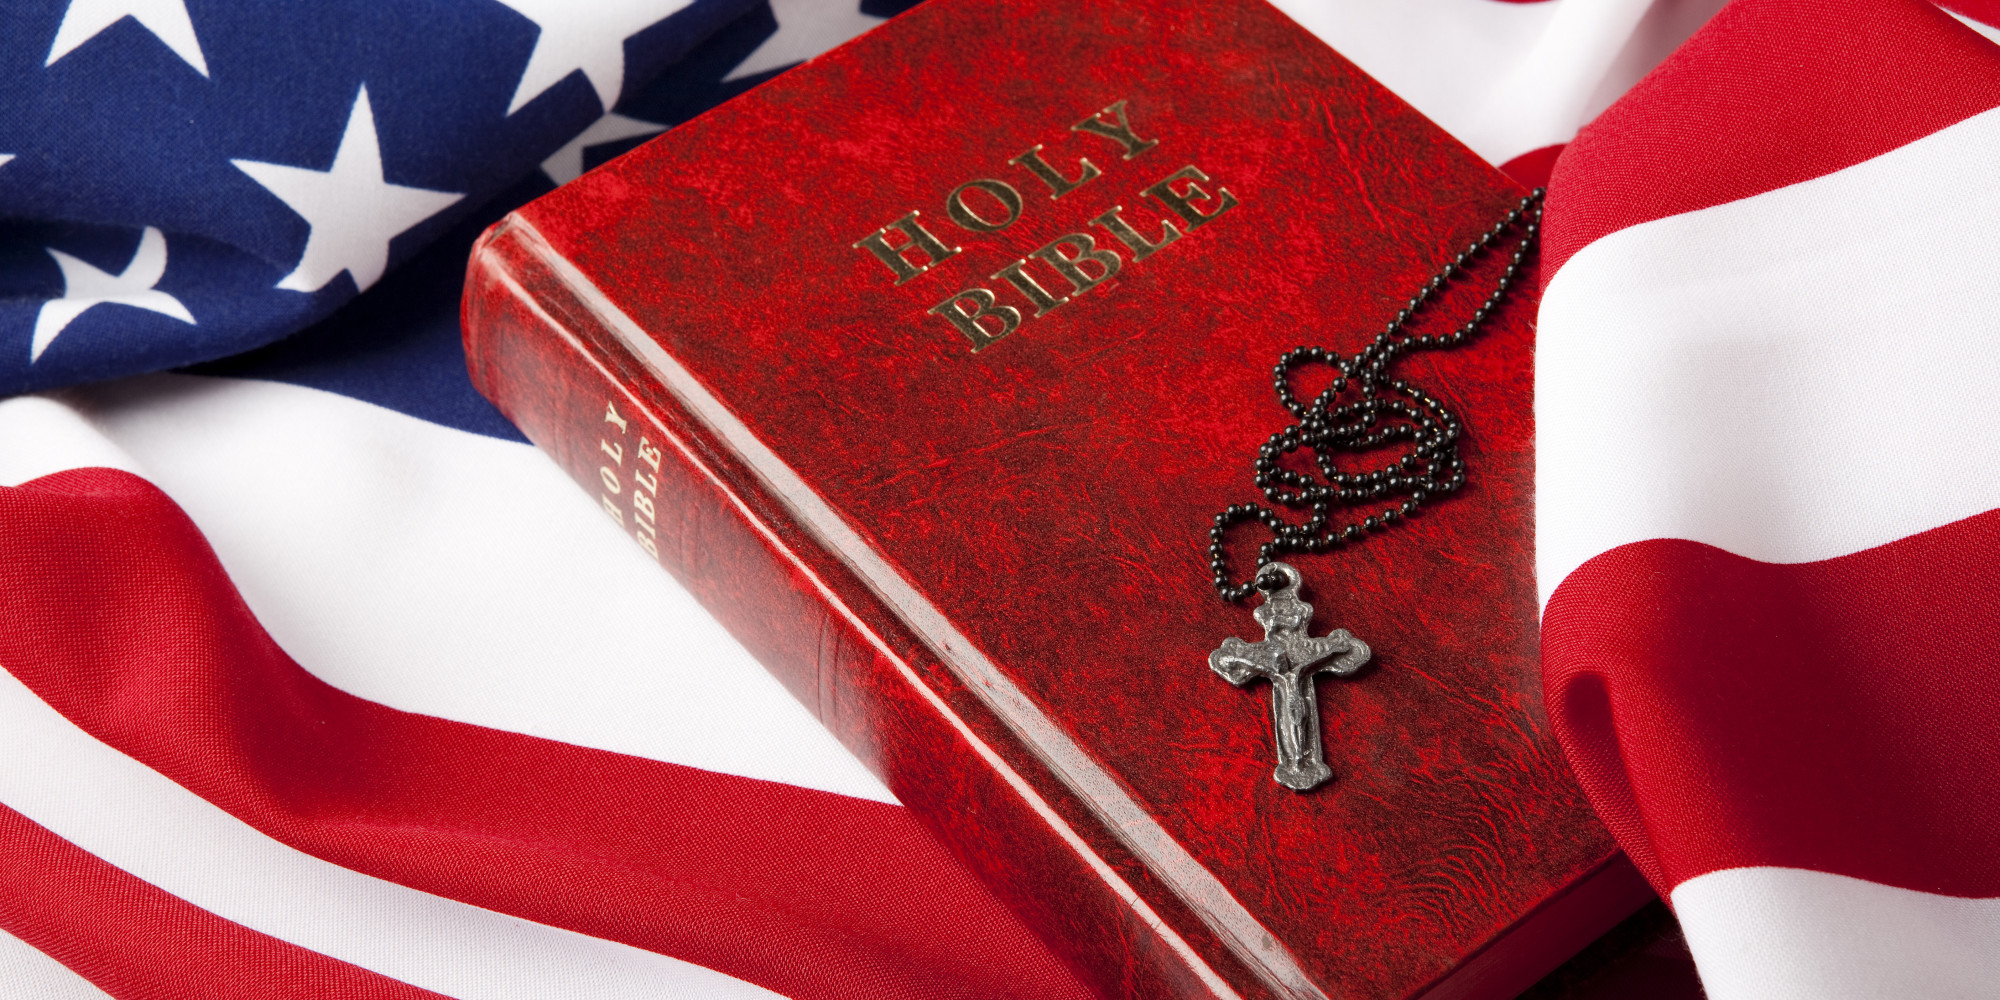 5 key findings about religiosity in the U.S. – and how it’s changing